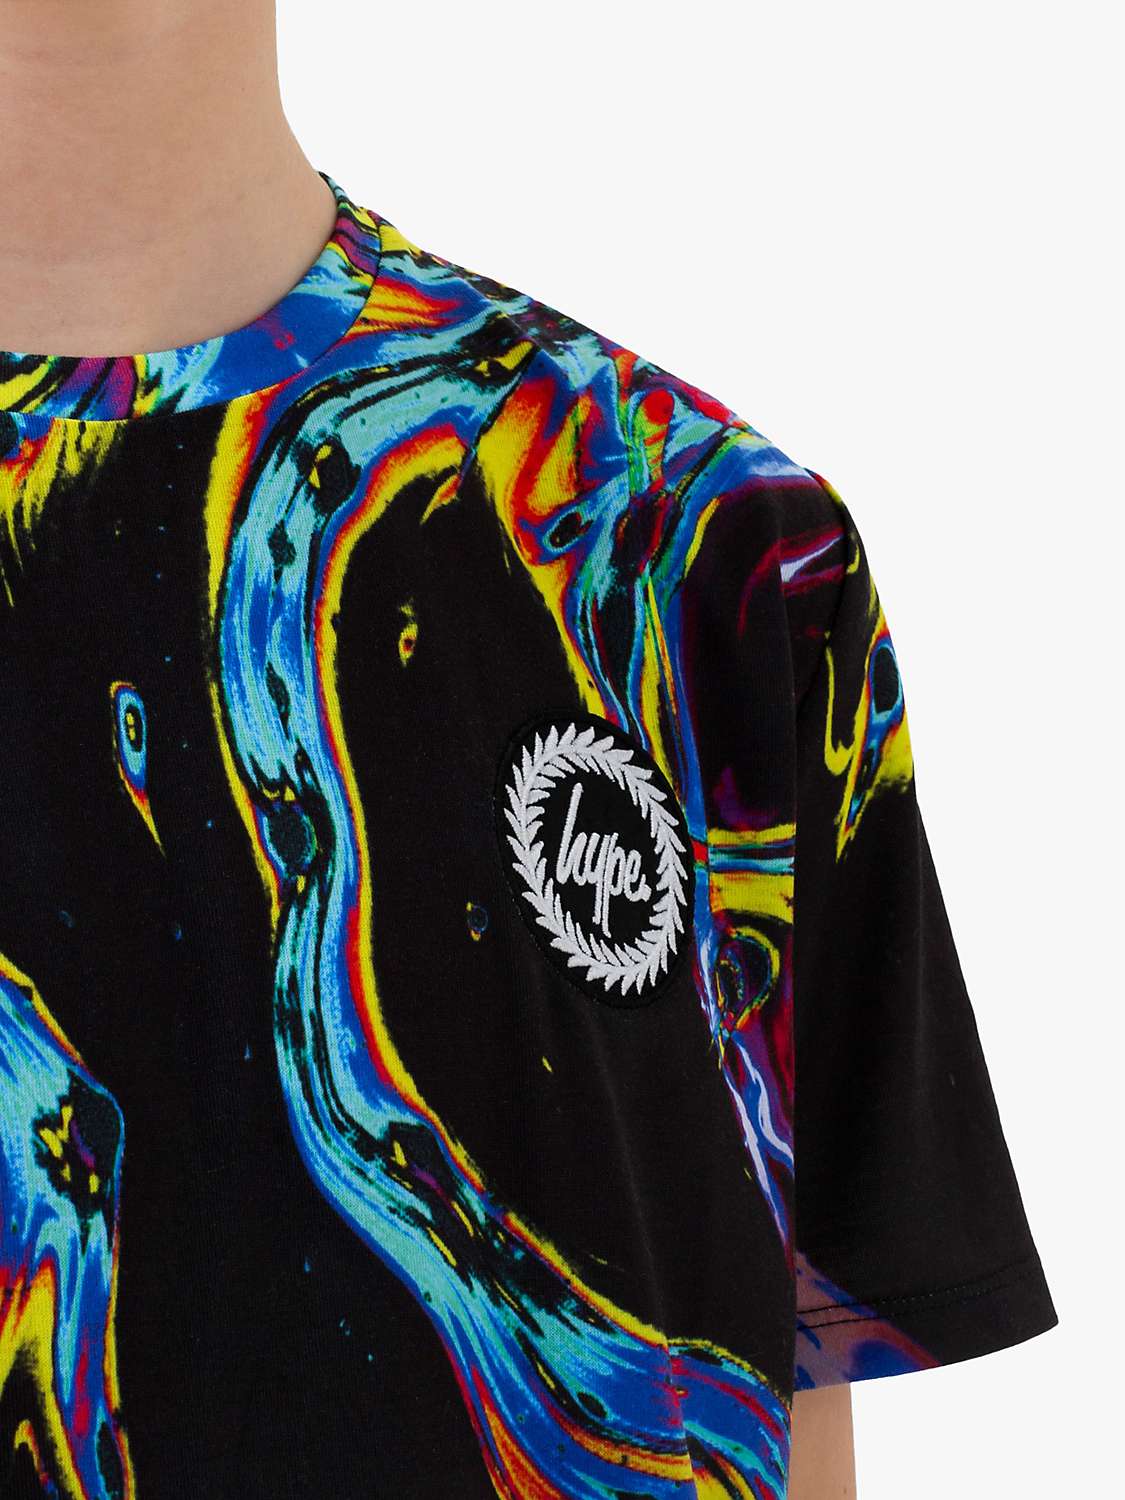 Hype Hype Marble Print T-Shirt Top 13 Years 